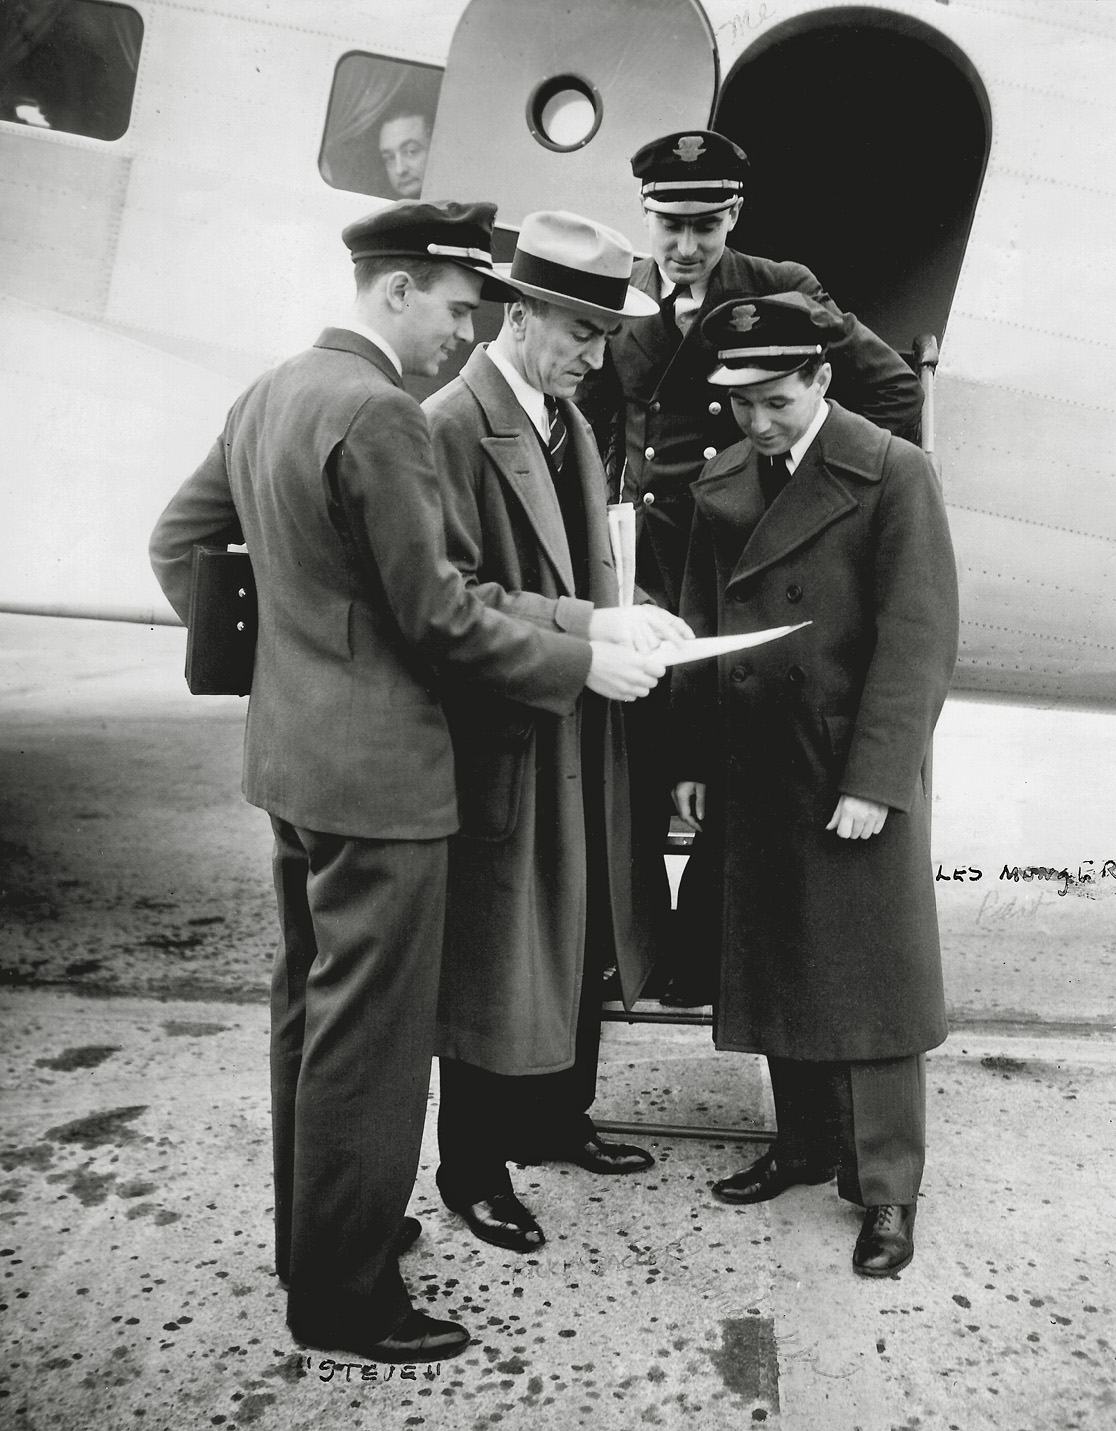 Here he is again, my Gramps, Warren Erickson, at the top of the steps. This time he is in Chicago in 1934 with Captain Eddie Rickenbacker, who's wearing the fedora. This is possibly a DC-1 or DC 2, since the DC-3 entered service a couple of years later. I'm sure this shot of them all looking with interest at some paper was posed; the passenger looking out the window may be thinking "OK, let's get this show on the road." View full size.